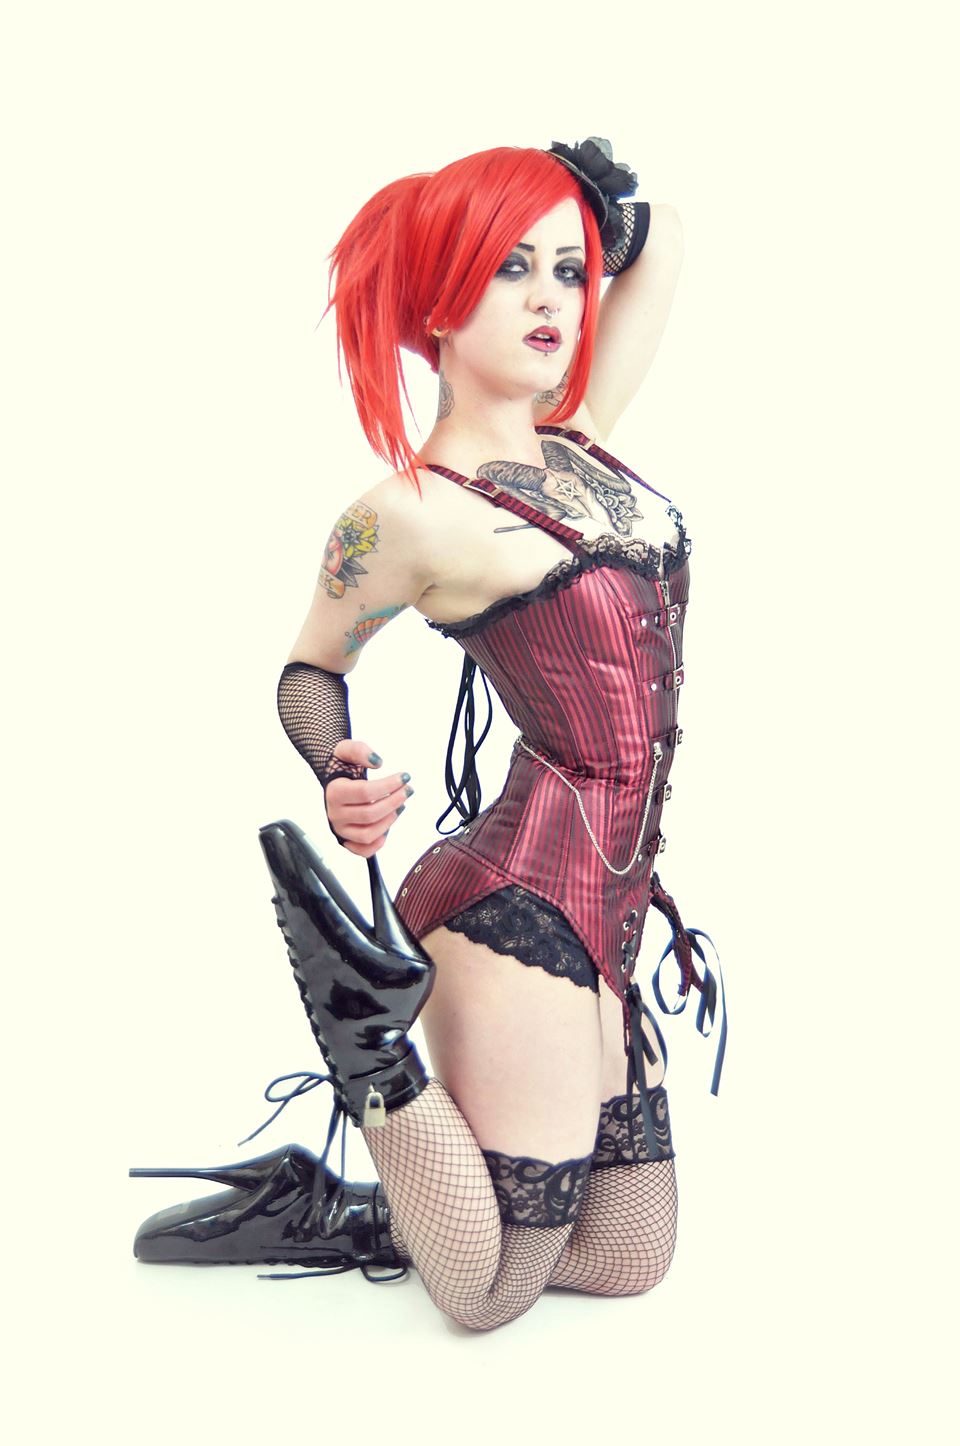 Kitty Von Crypt Photo by Mark Coxon Jaded Images